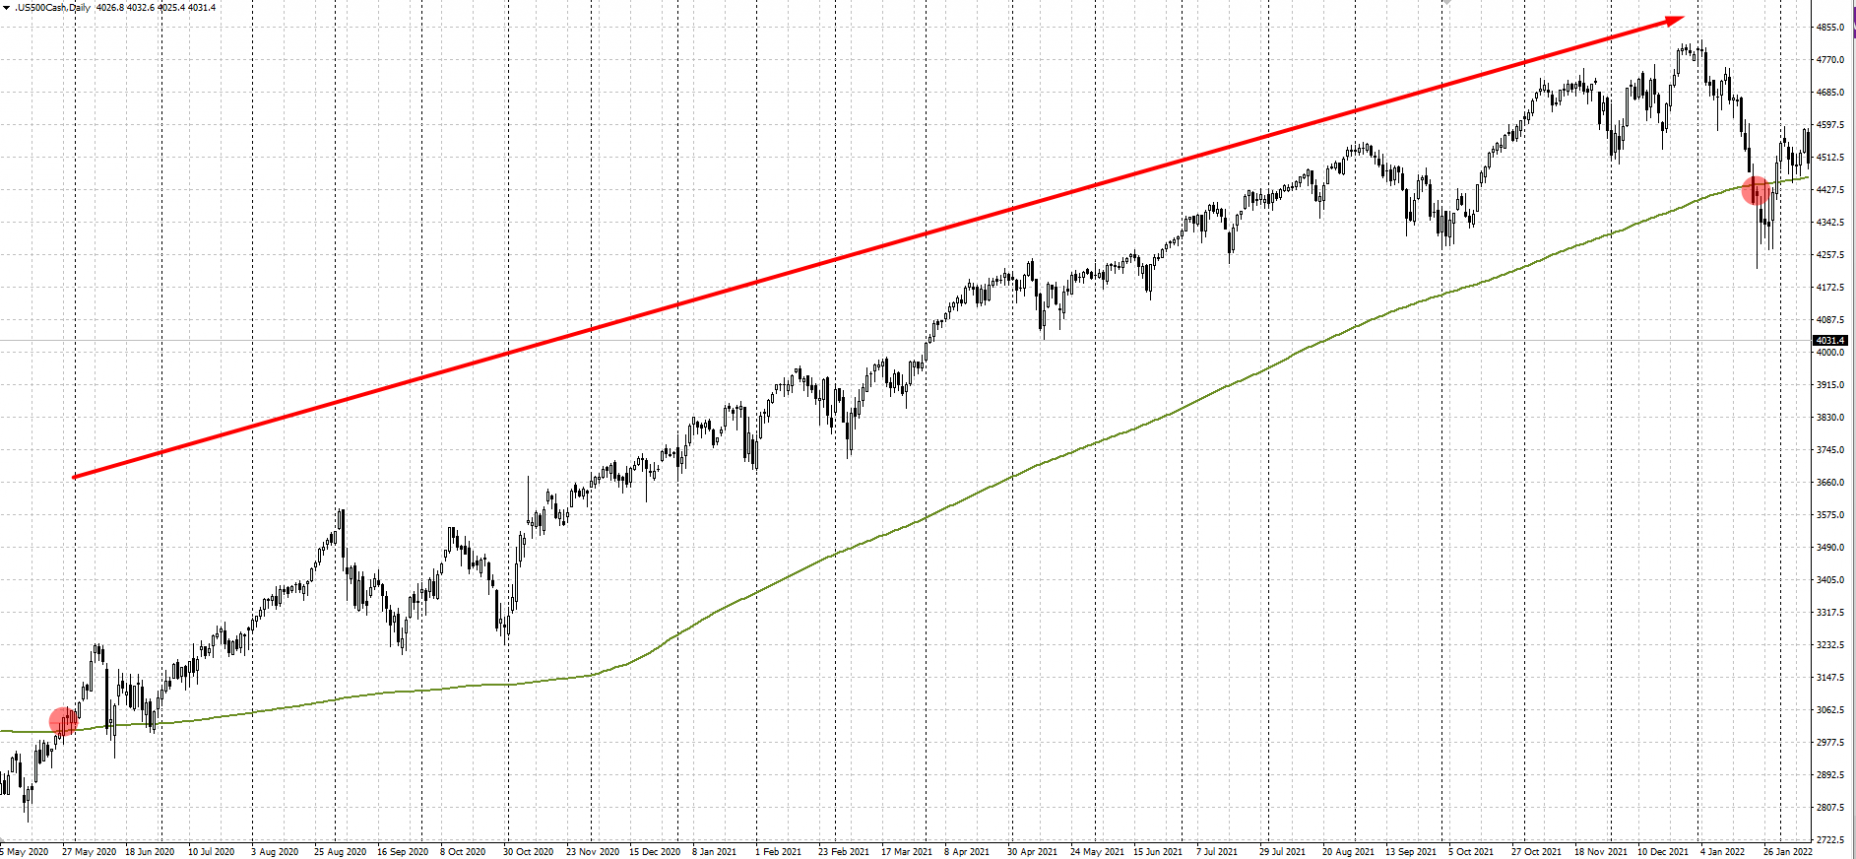 Buying example of the “S&P 500 Trend Following